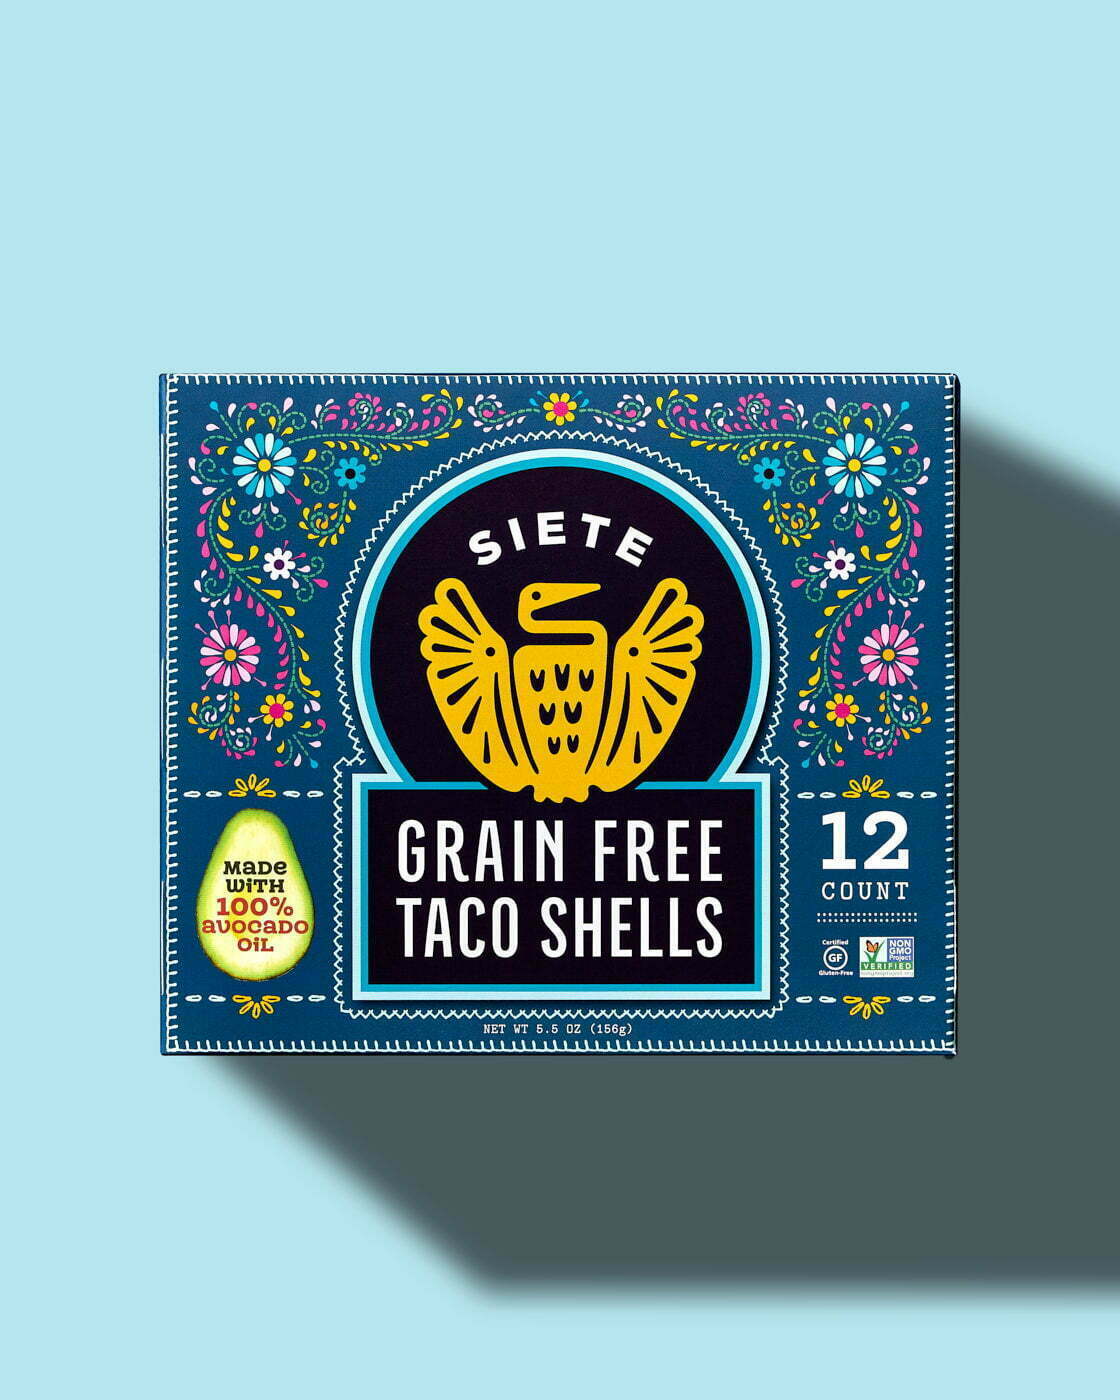 Siete Grain Free Taco Shells packaging sitting on a light blue background.